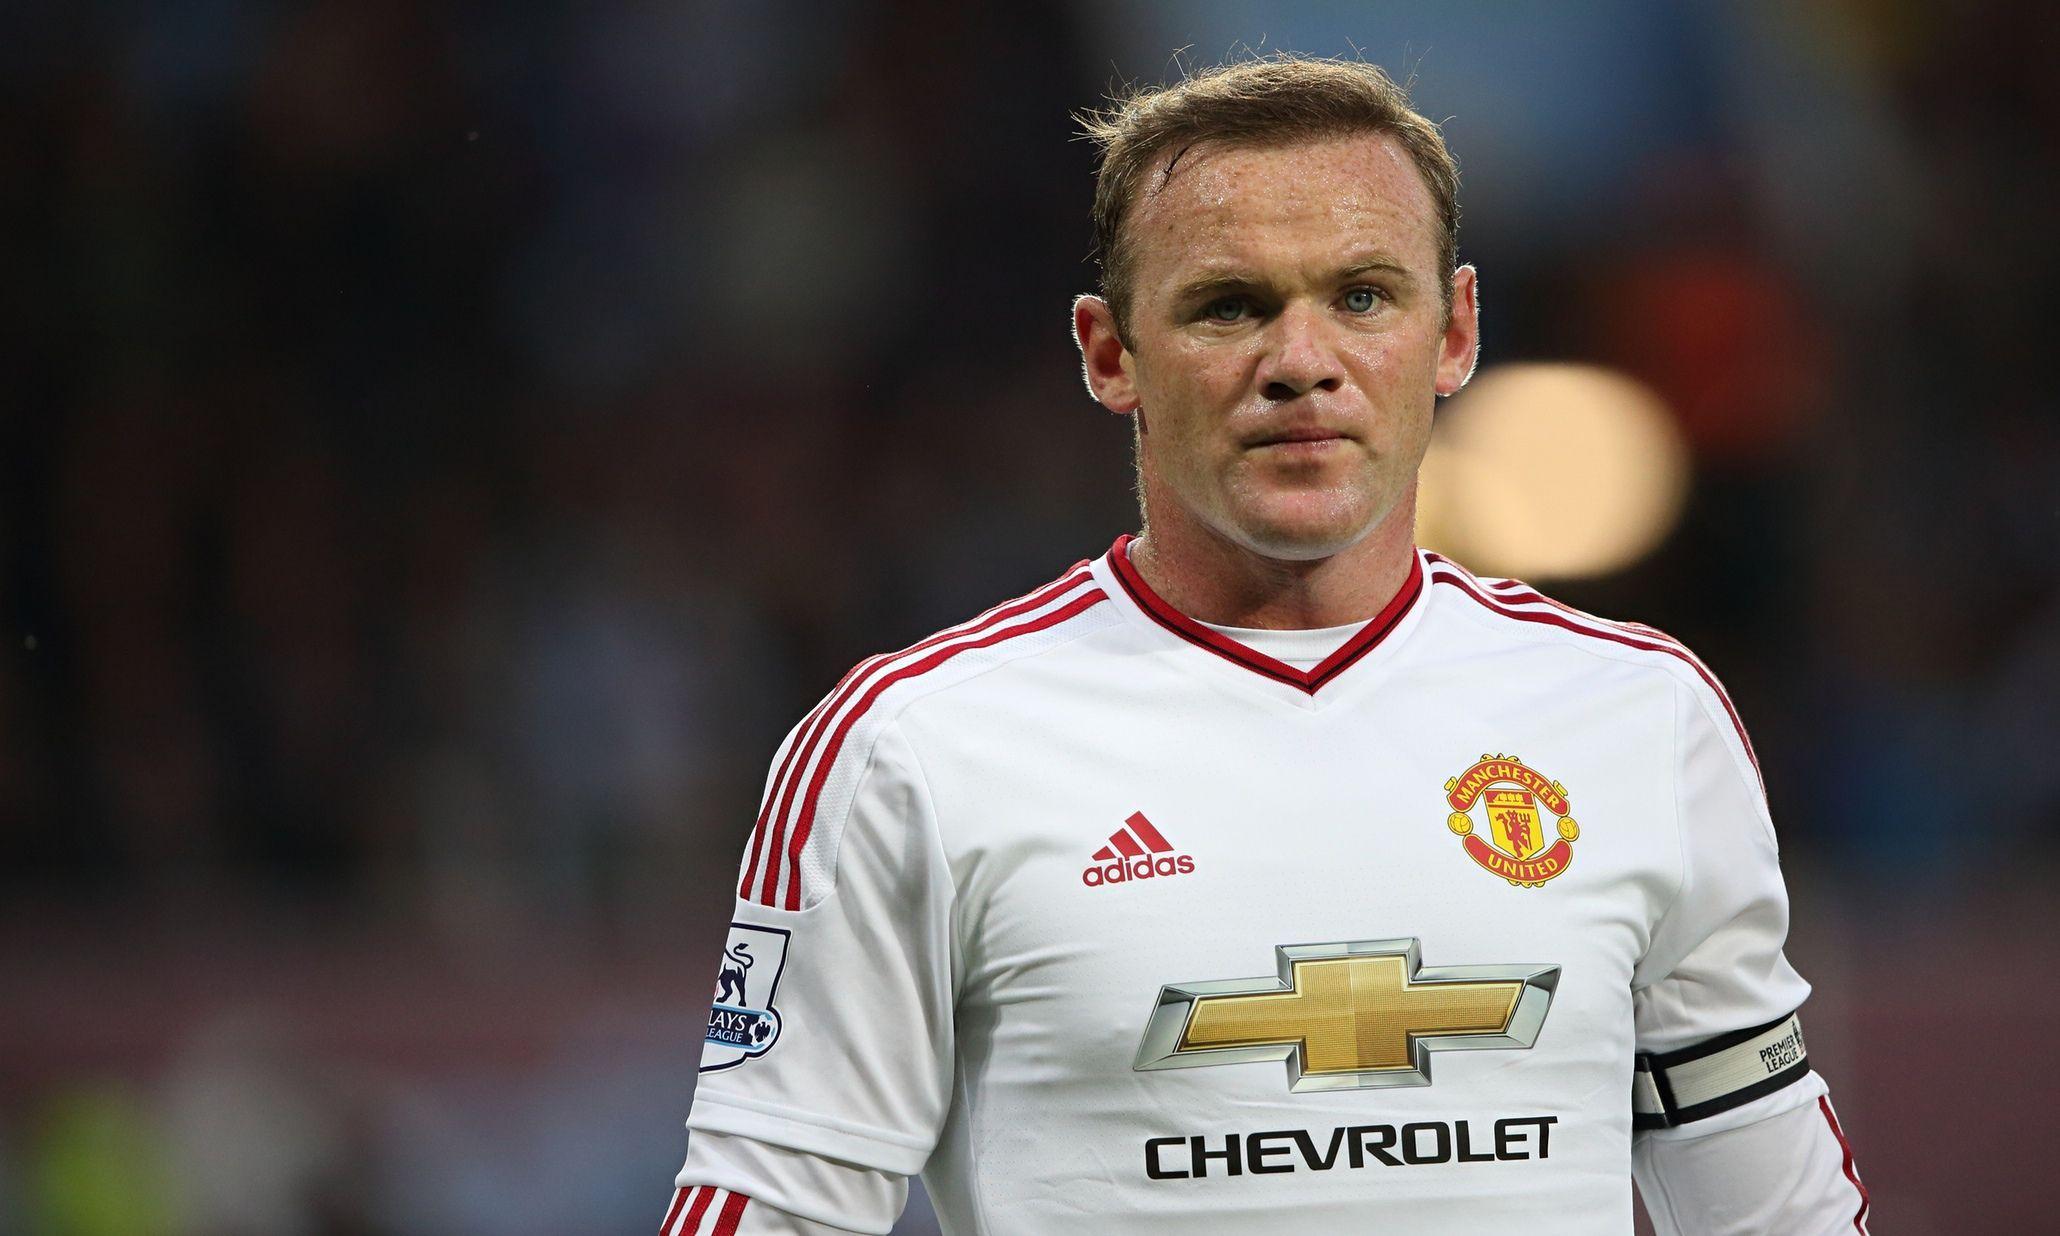 Wayne Rooney Wallpaper High Resolution and Quality Download